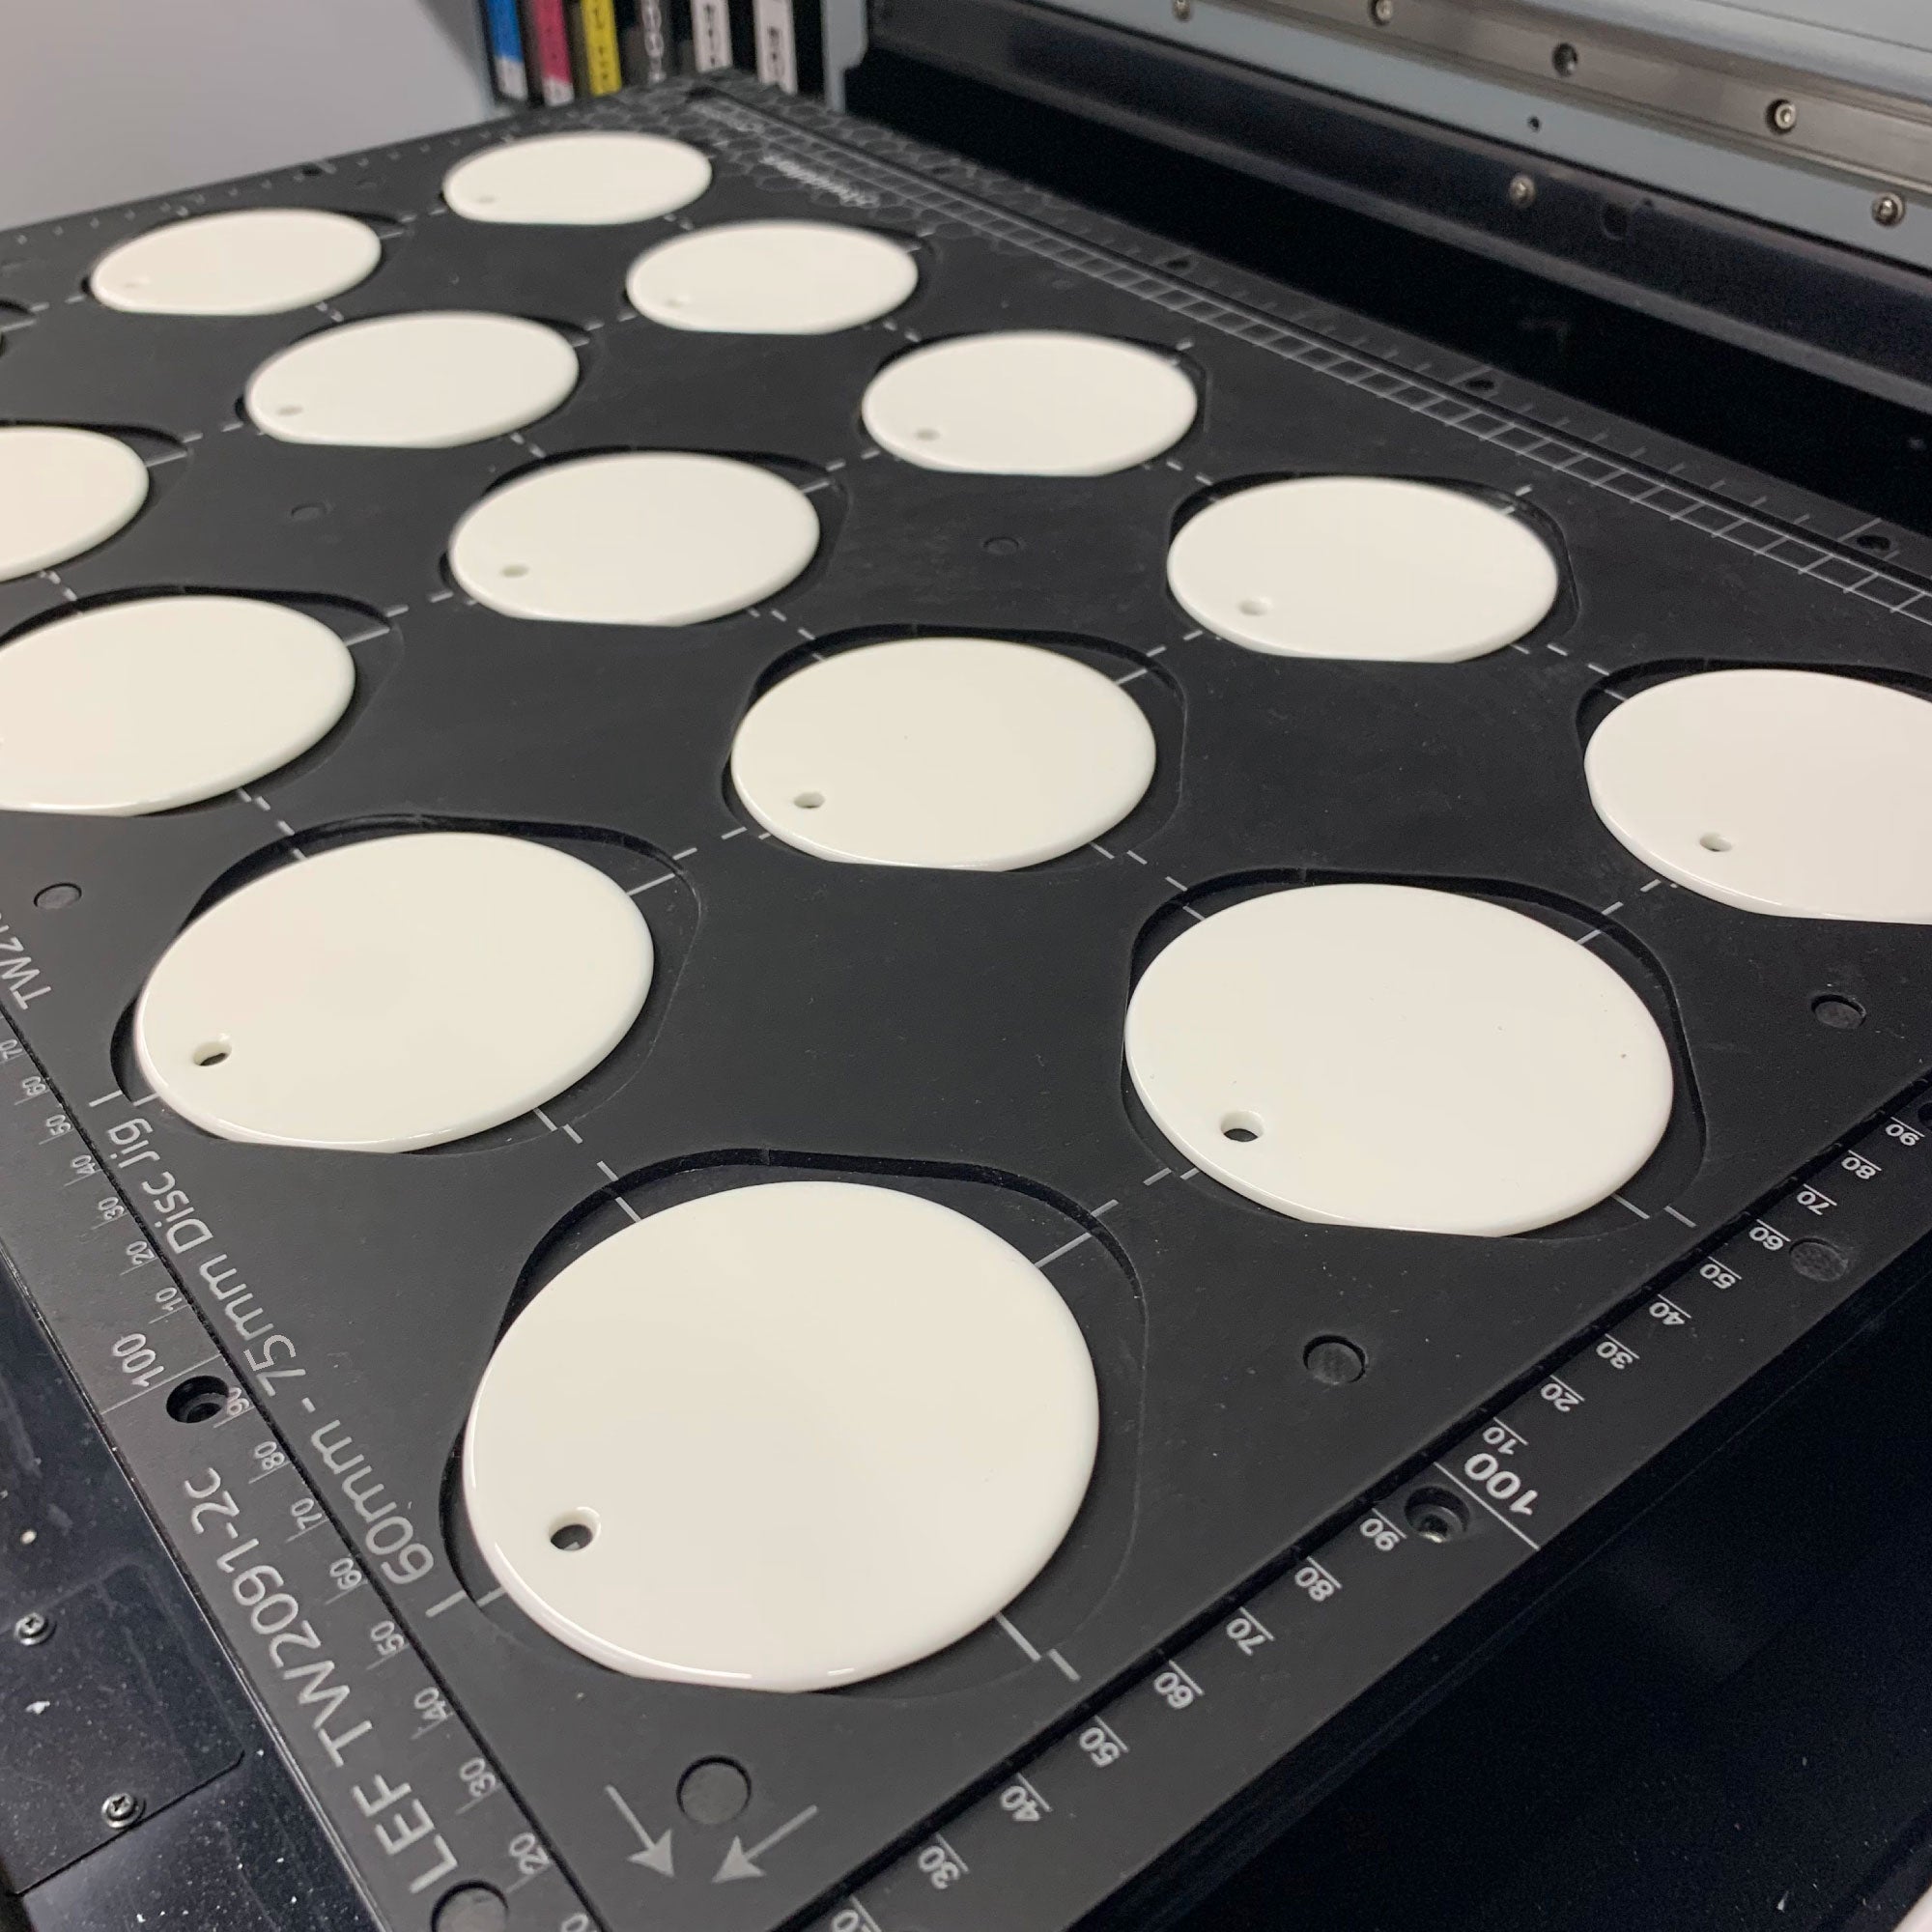 Ceramic Christmas Bauble Printing Jig for Mimaki UJF-6042 Flatbed Printer: 60mm - 77mm Circular Discs (24 Spaces)